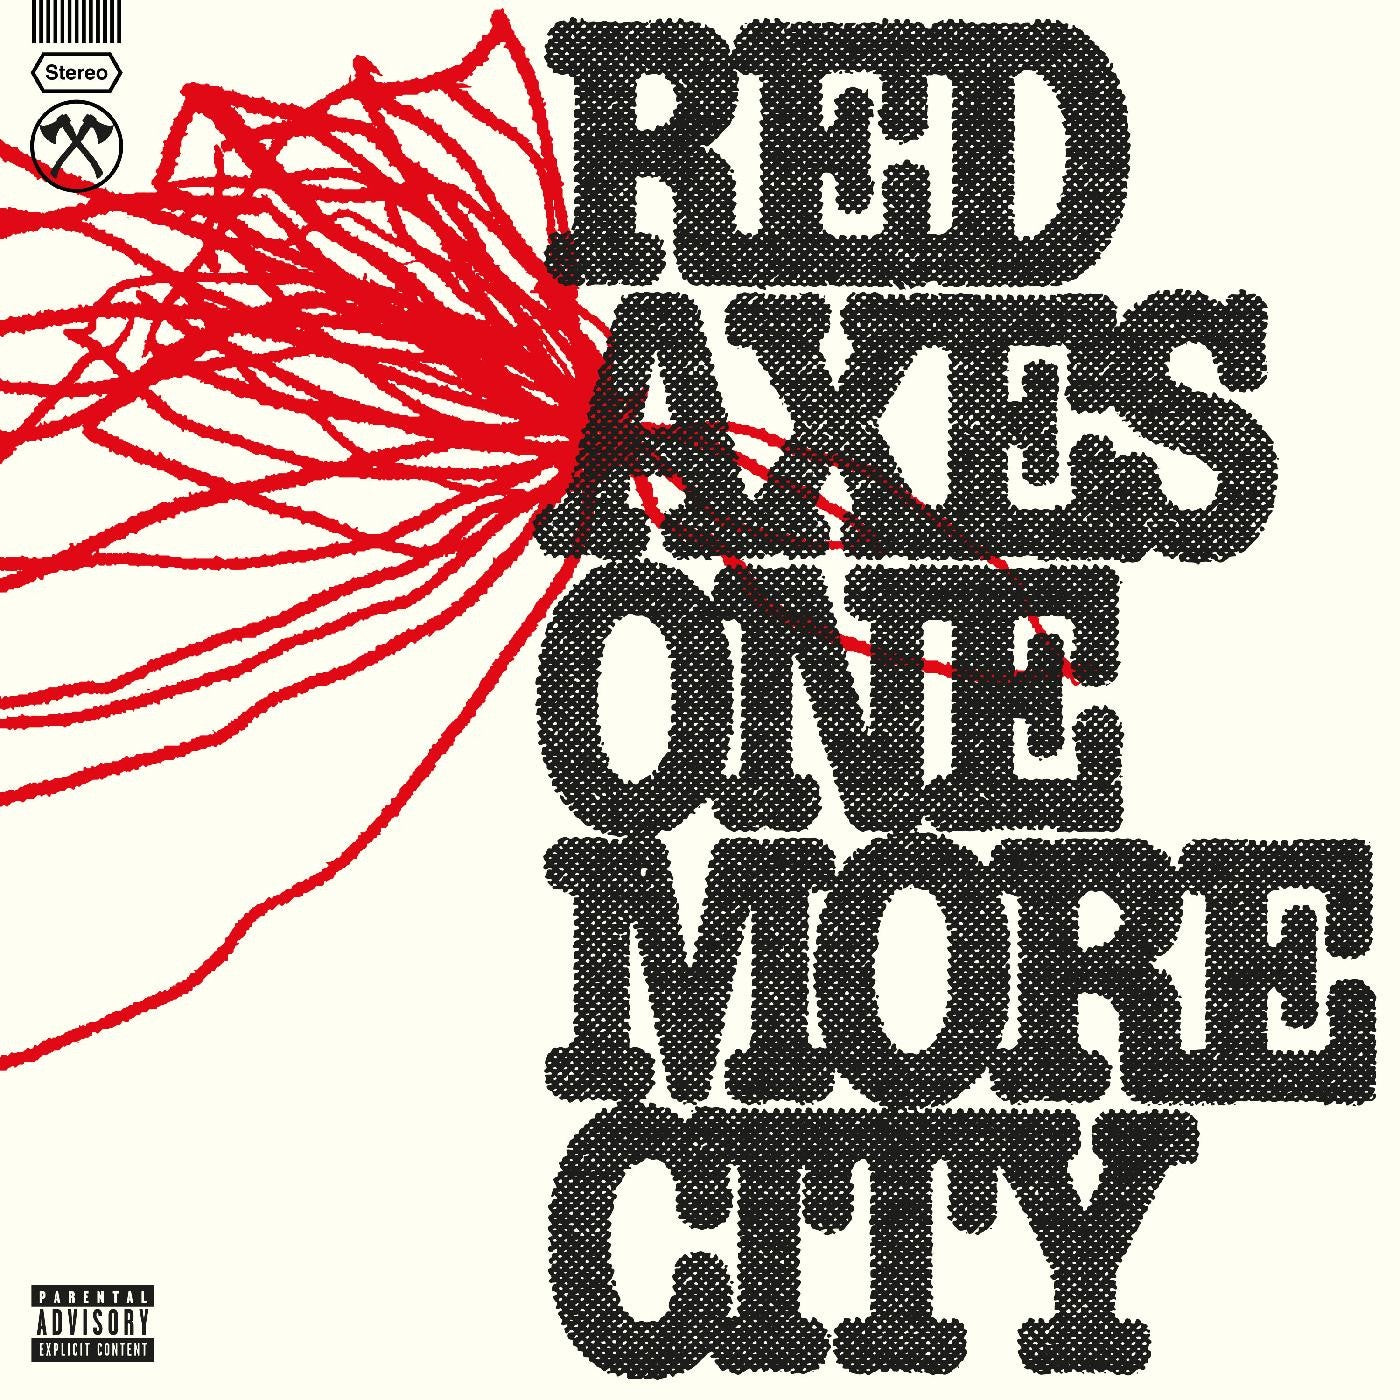 Red Axes - One More City - New LP Record 2023 fabric UK Import Vinyl - Electronic / House / Post-Punk / New Wave